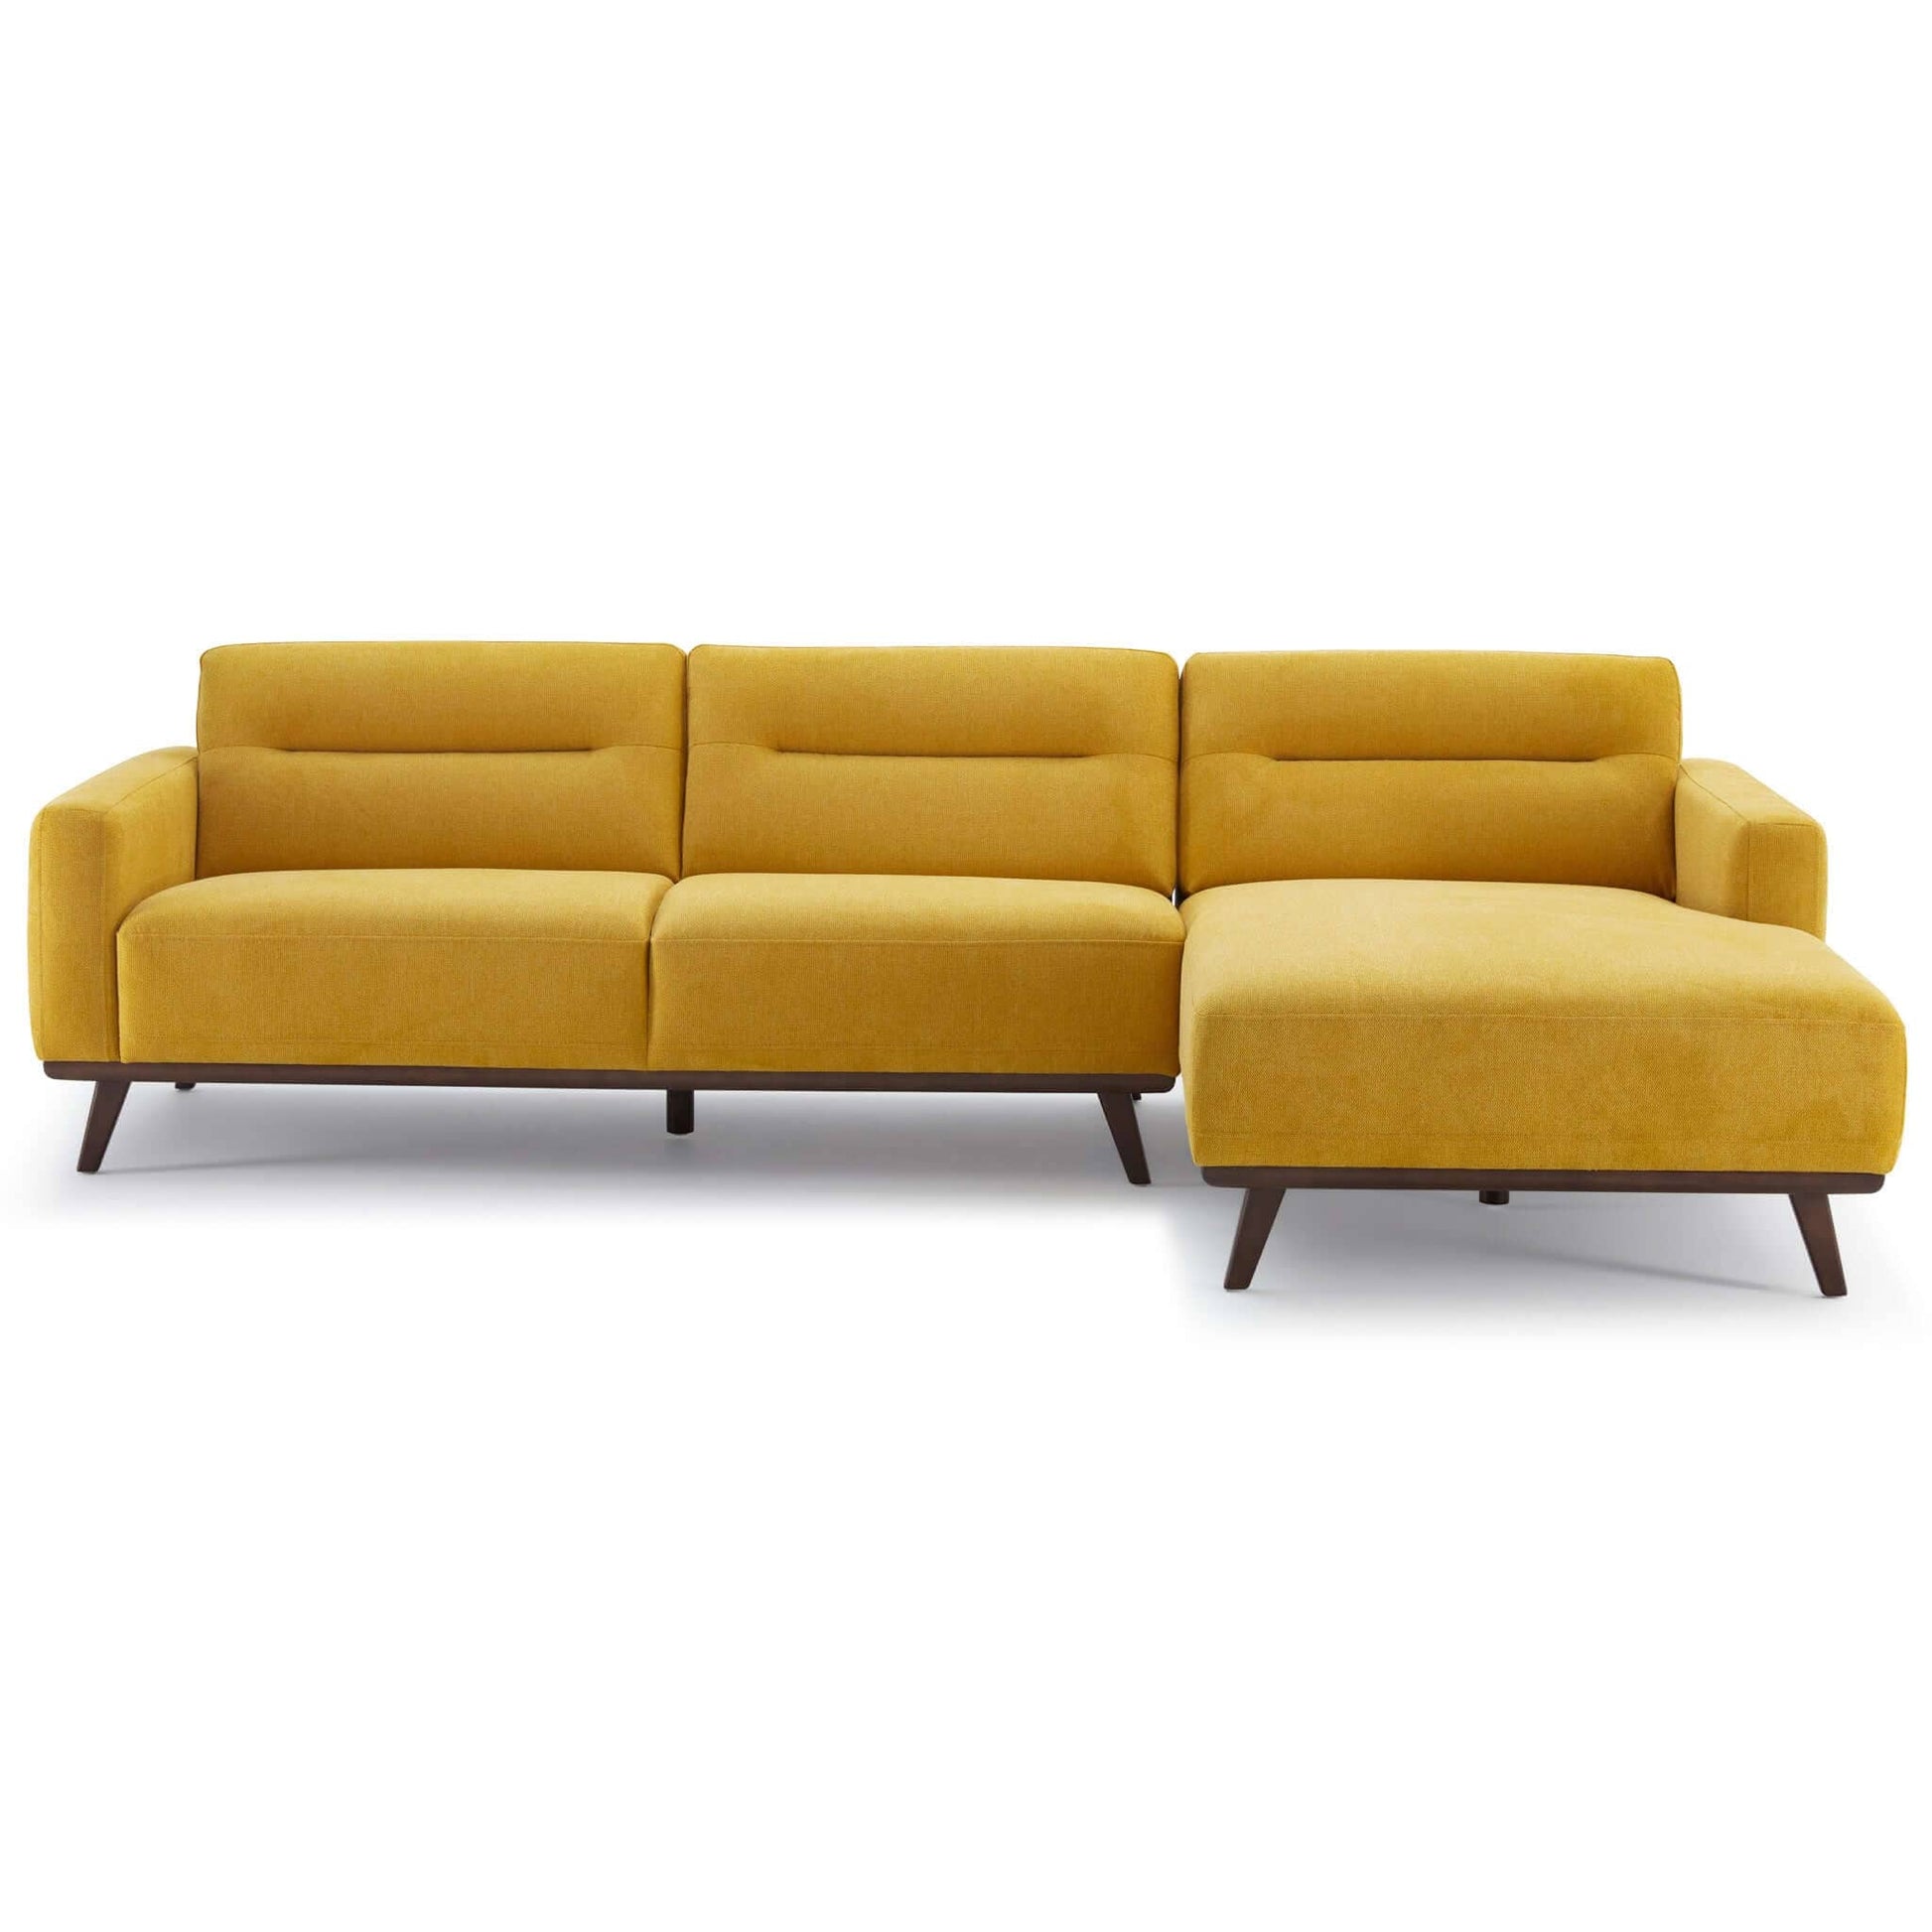 Ashcroft Furniture Co Sectional Sofas Rigt-Sectional Ella L-Shaped Dark Yellow Linen Left Sectional Couch